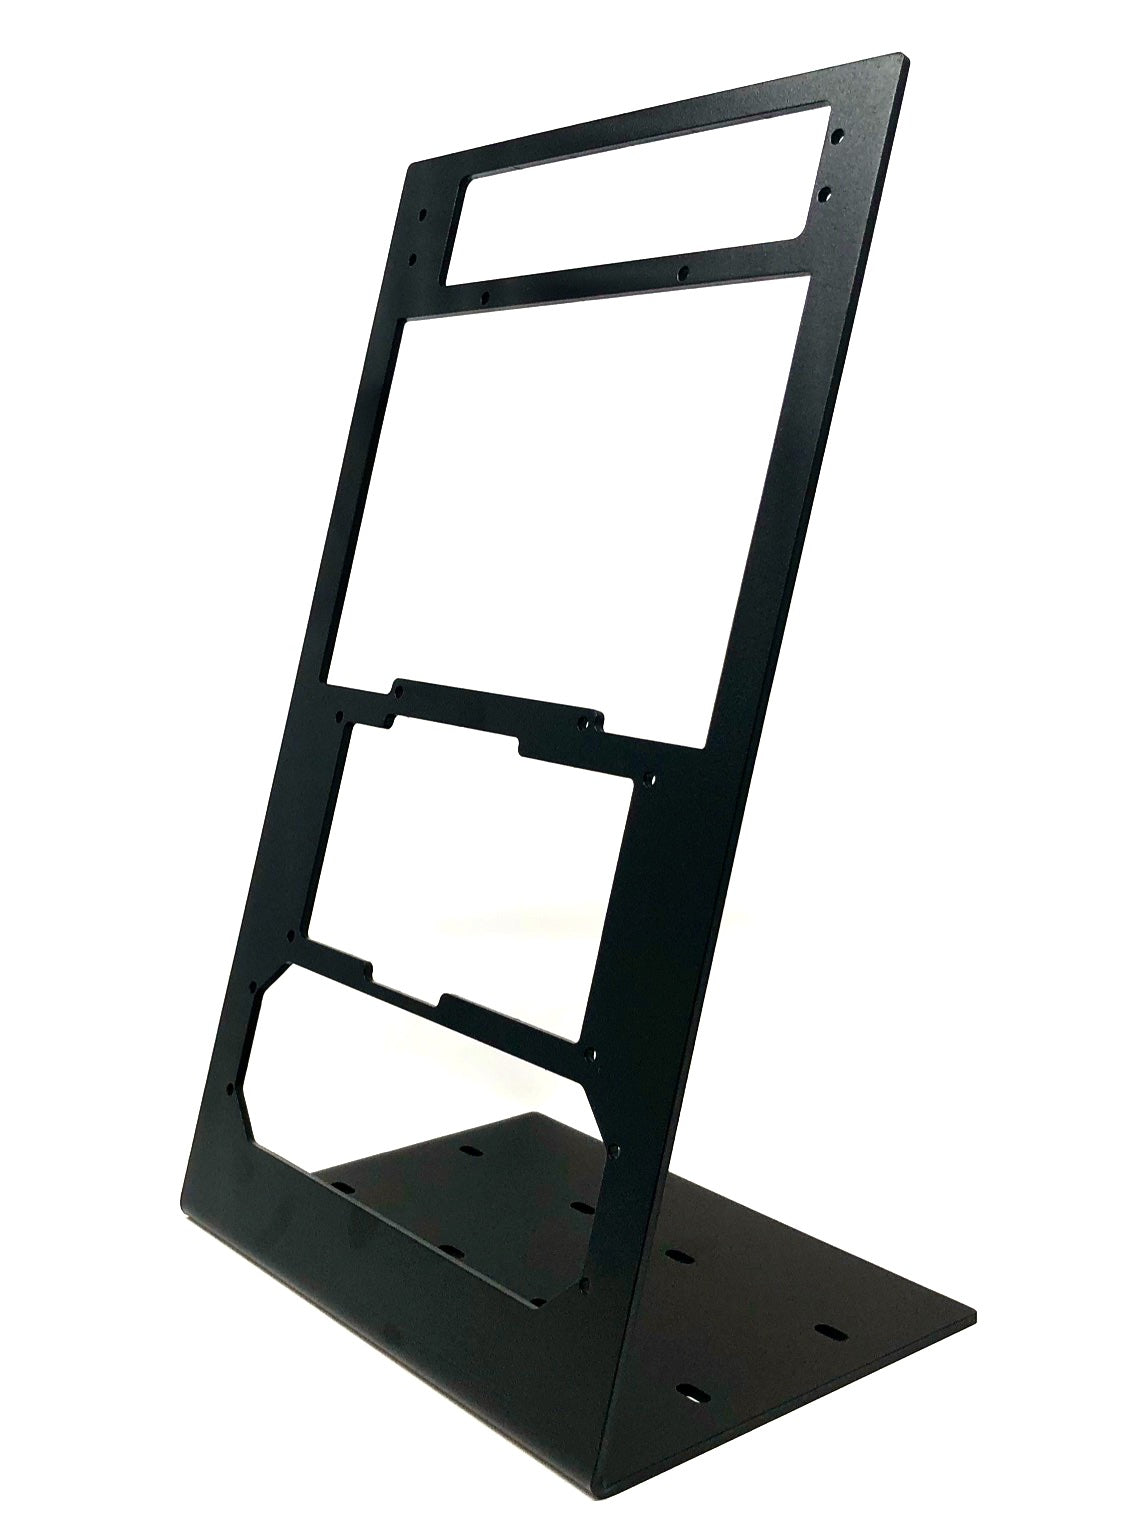 Desktop stand for RSG GMA350 GNS530 GNS430 GFC500